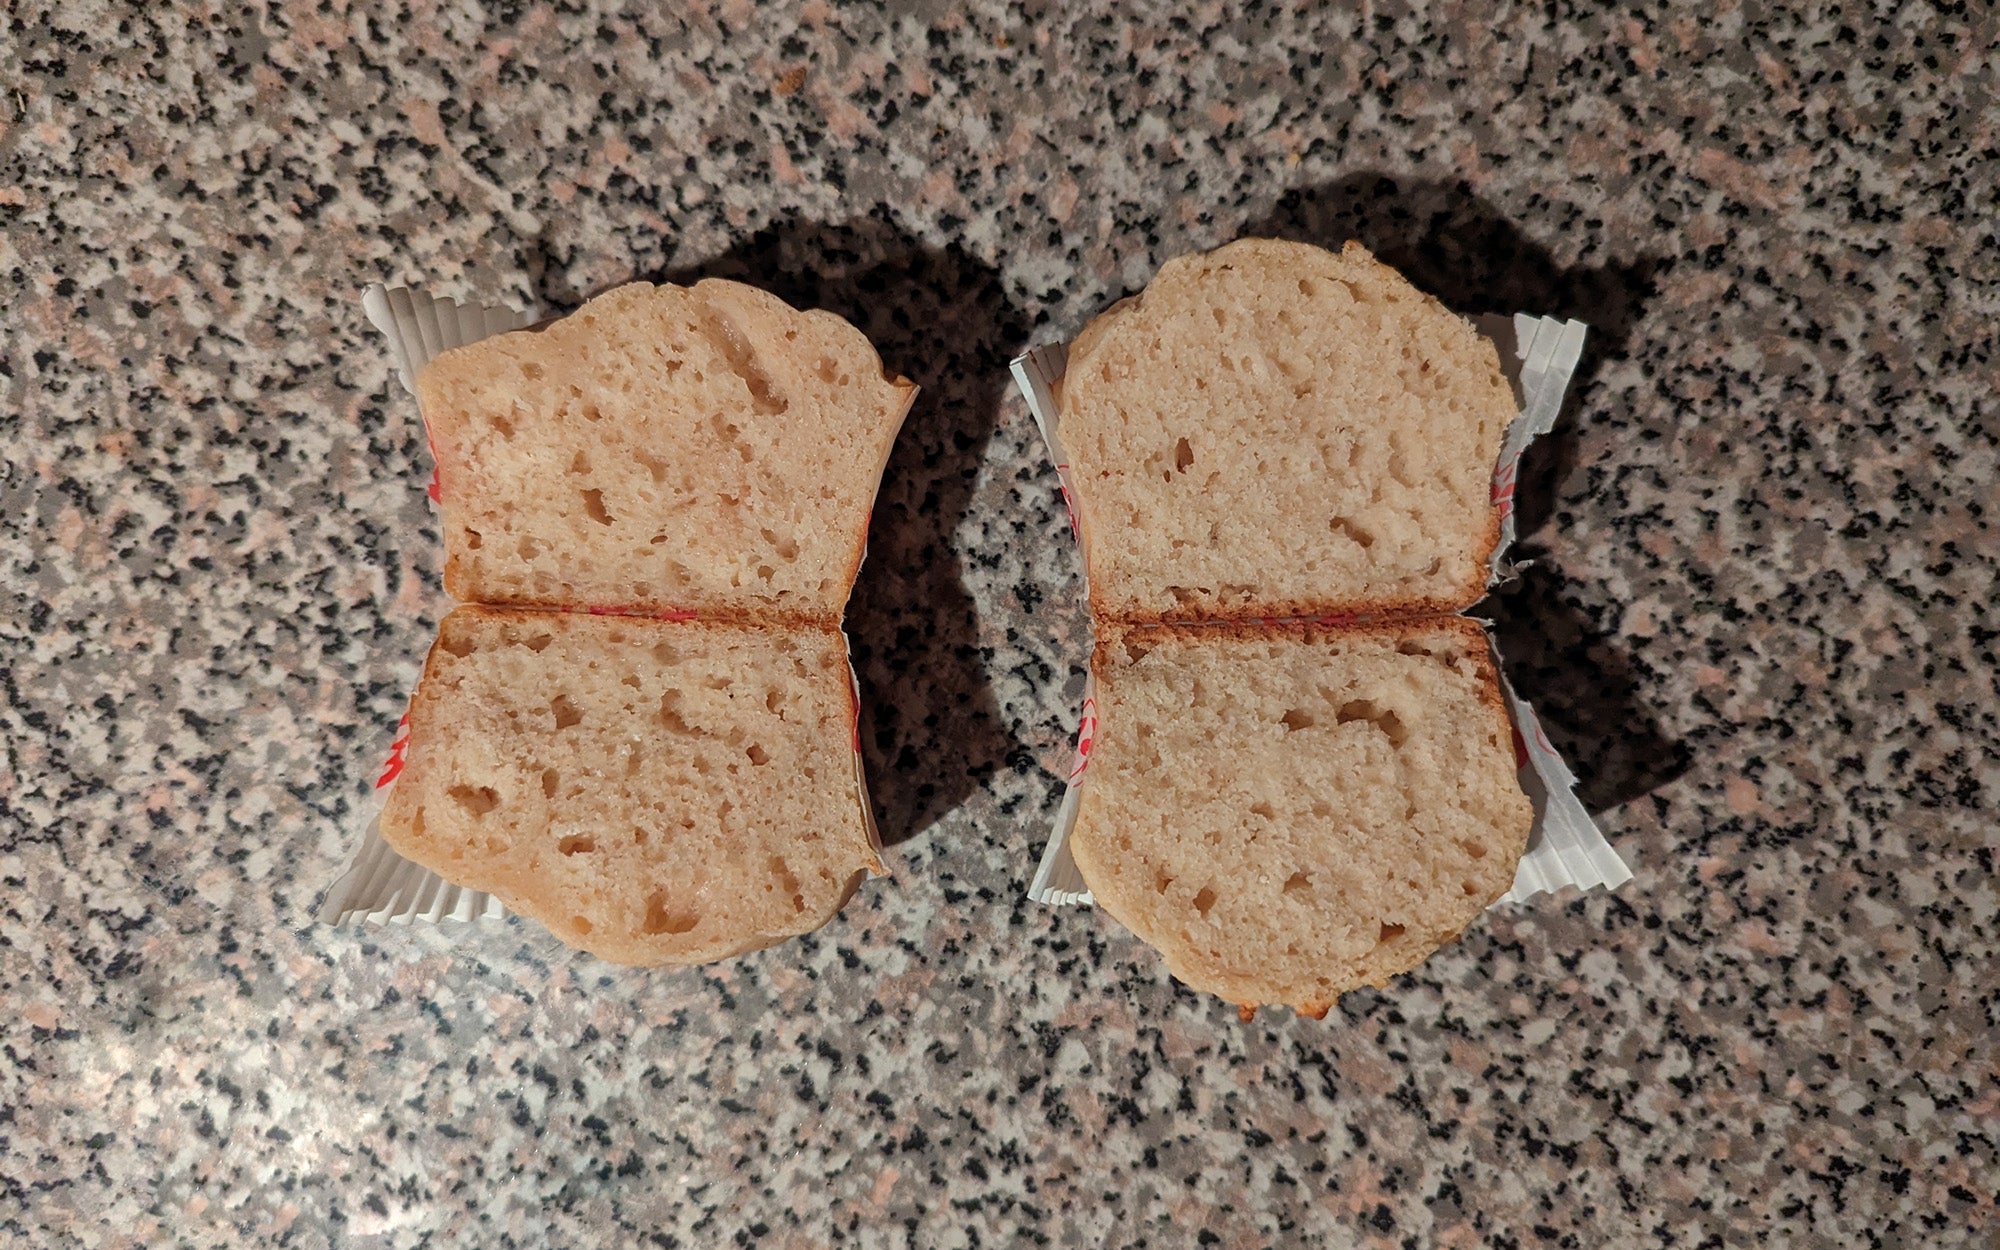 Two muffins cut in half to expose the inner texture of the bake